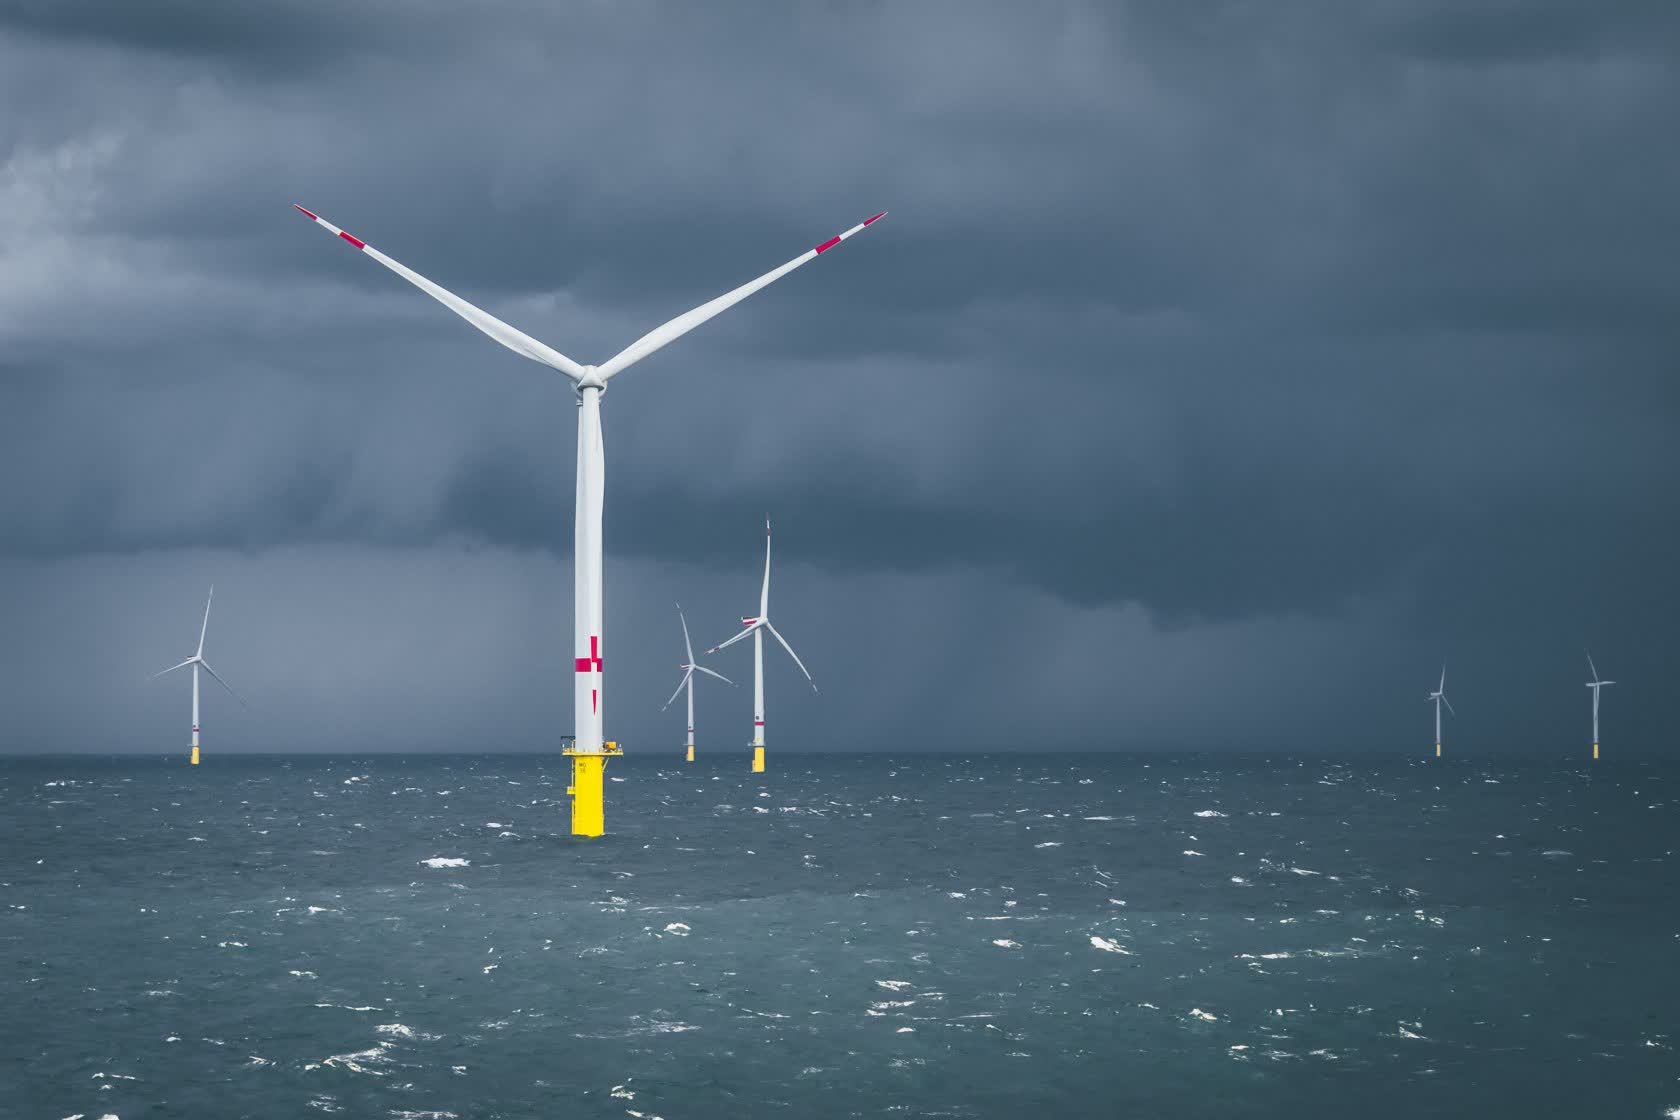 The UK aims to power each home with wind energy by 2030